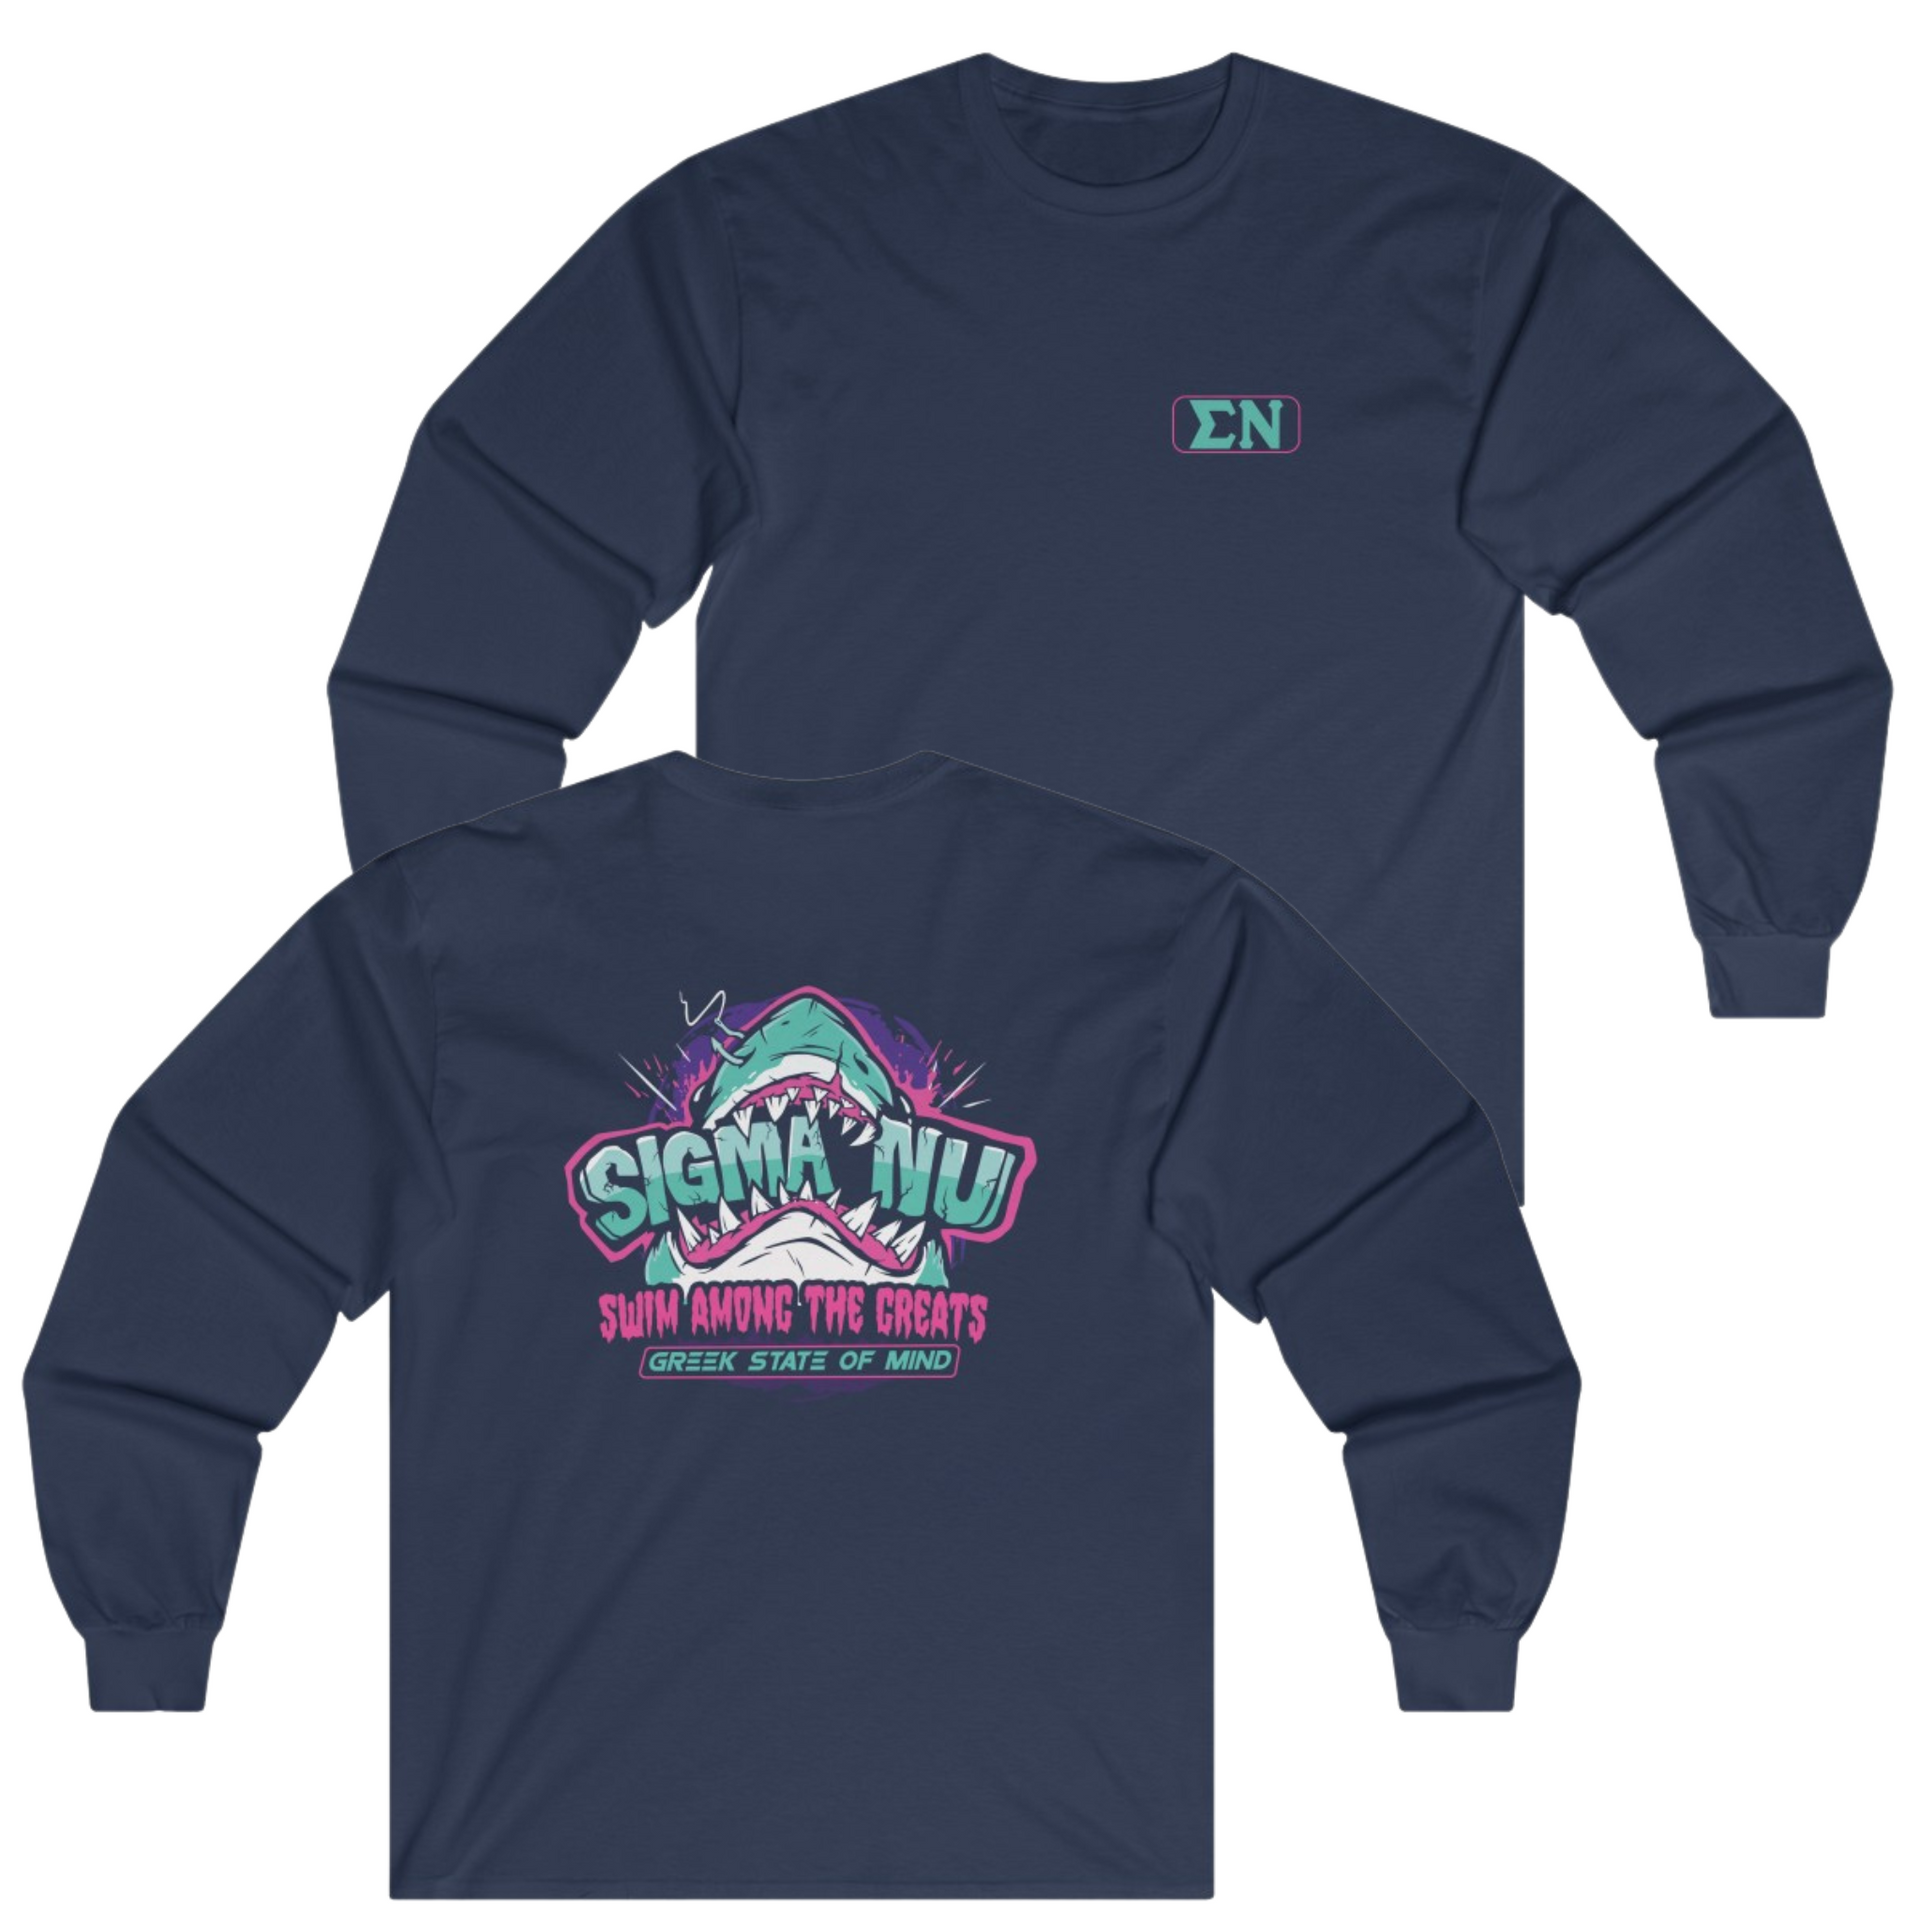 Navy Sigma Nu Graphic Long Sleeve | The Deep End | Sigma Nu Clothing, Apparel and Merchandise